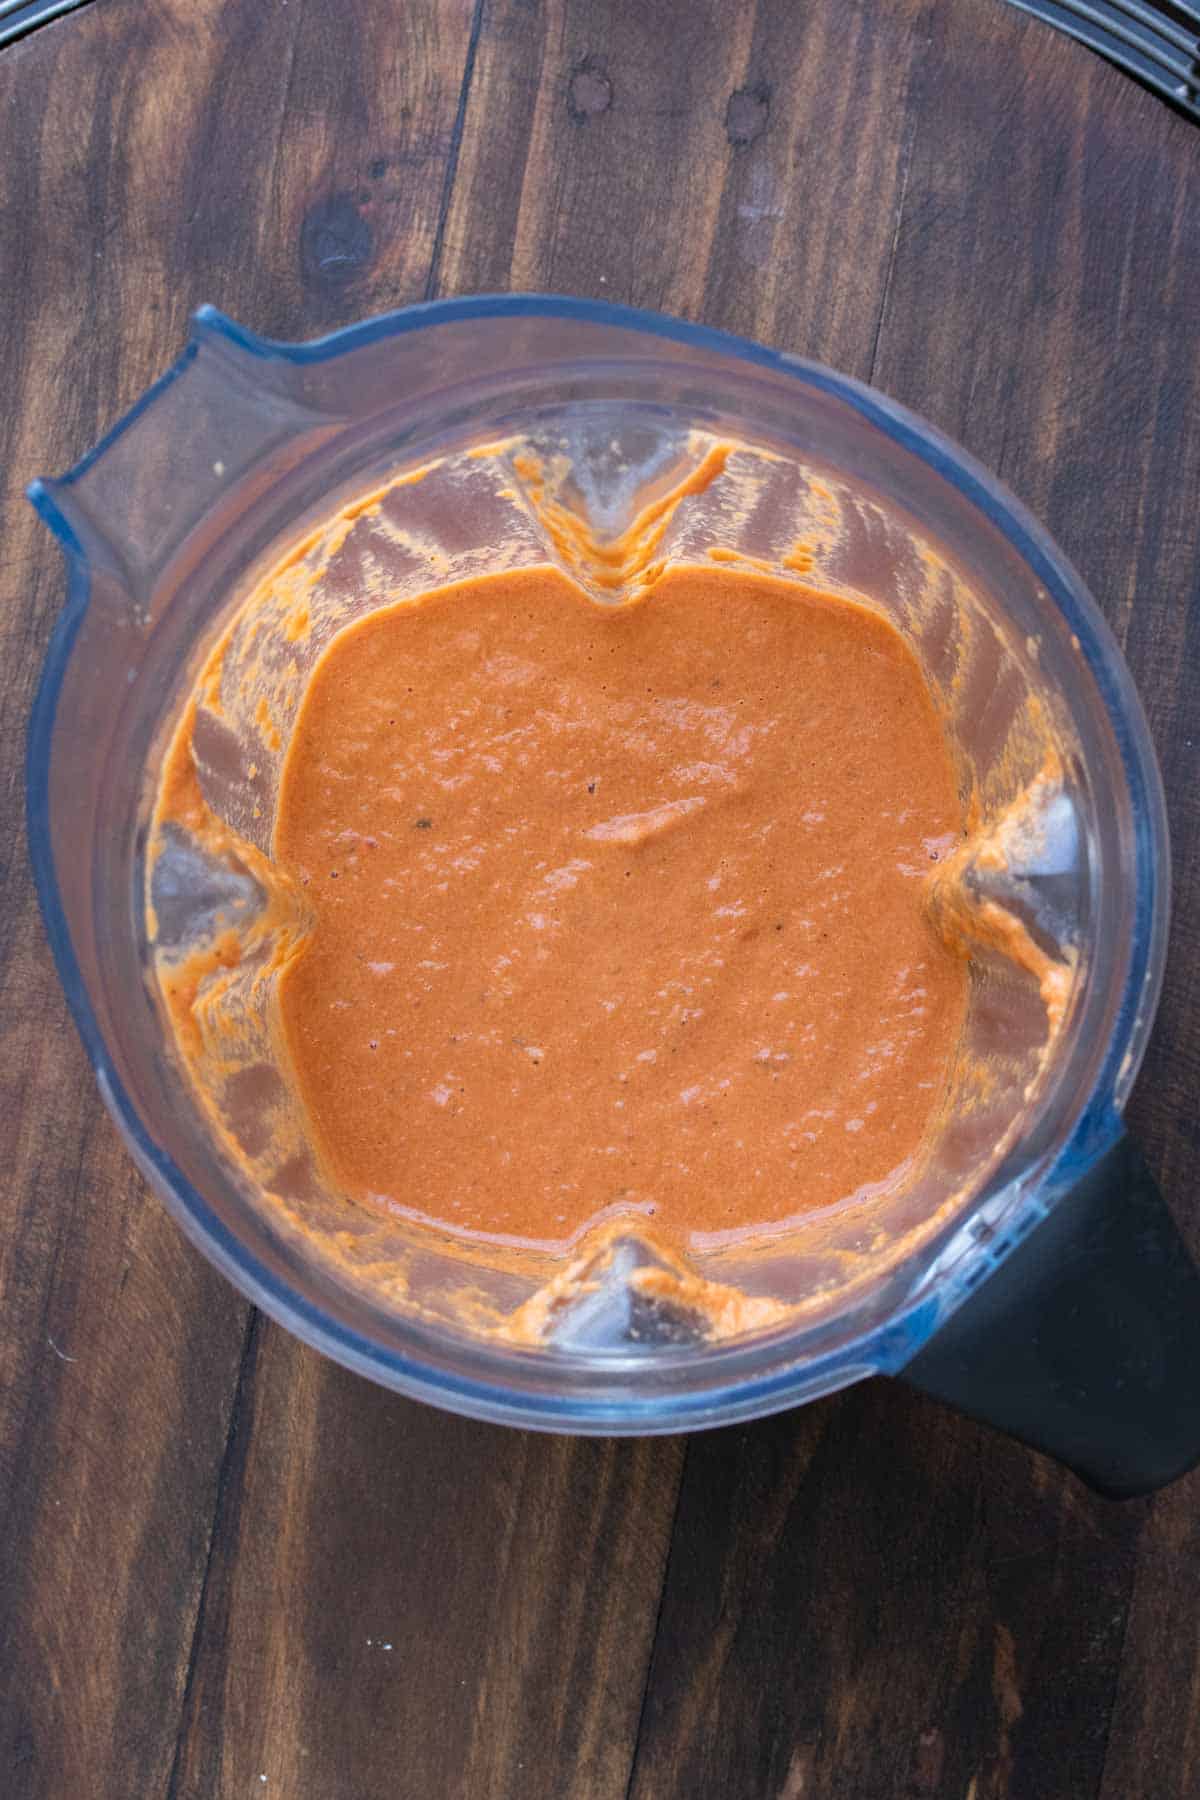 Top view of a blender with creamy tomato soup inside